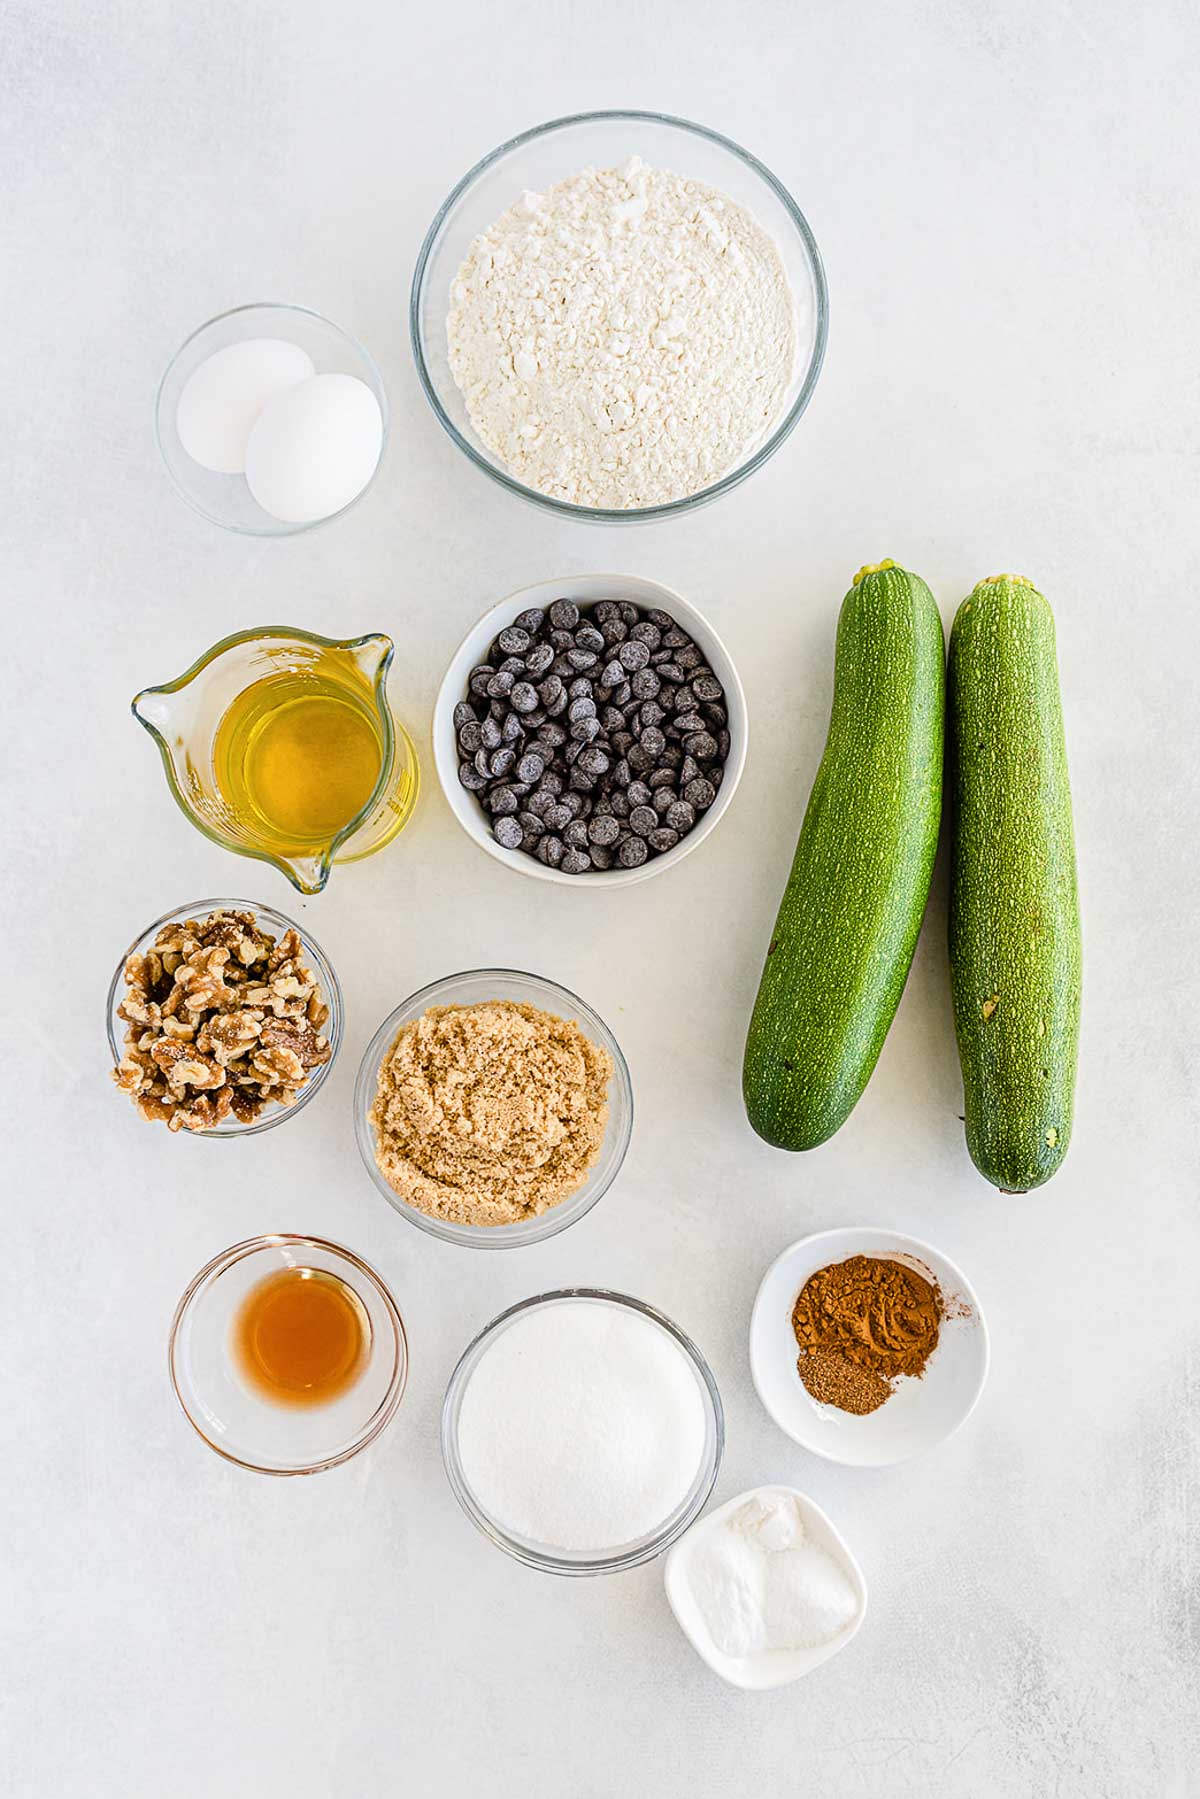 several glass bowls filled with ingredients for zucchini bread - two whole zucchini, brown sugar, white sugar, flour, cinnamon, baking soda, oil, chocolate chips and walnuts